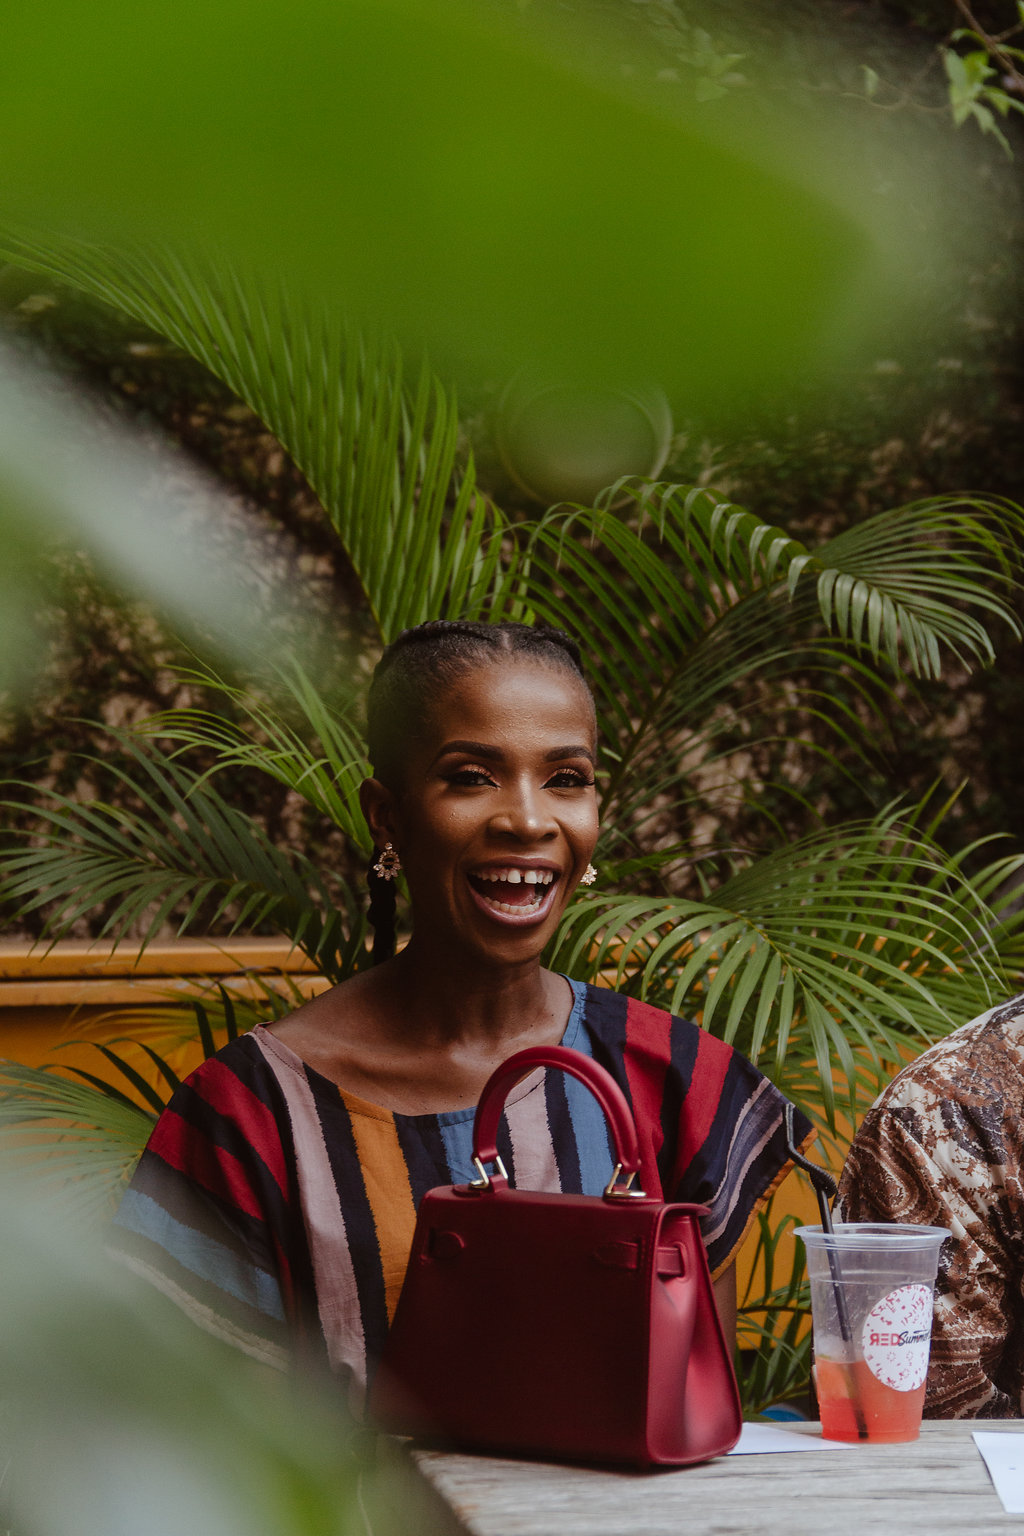 ElanRed Takes Over the African Artists Foundation For A Lavish Summer Soiree #RedSummer18